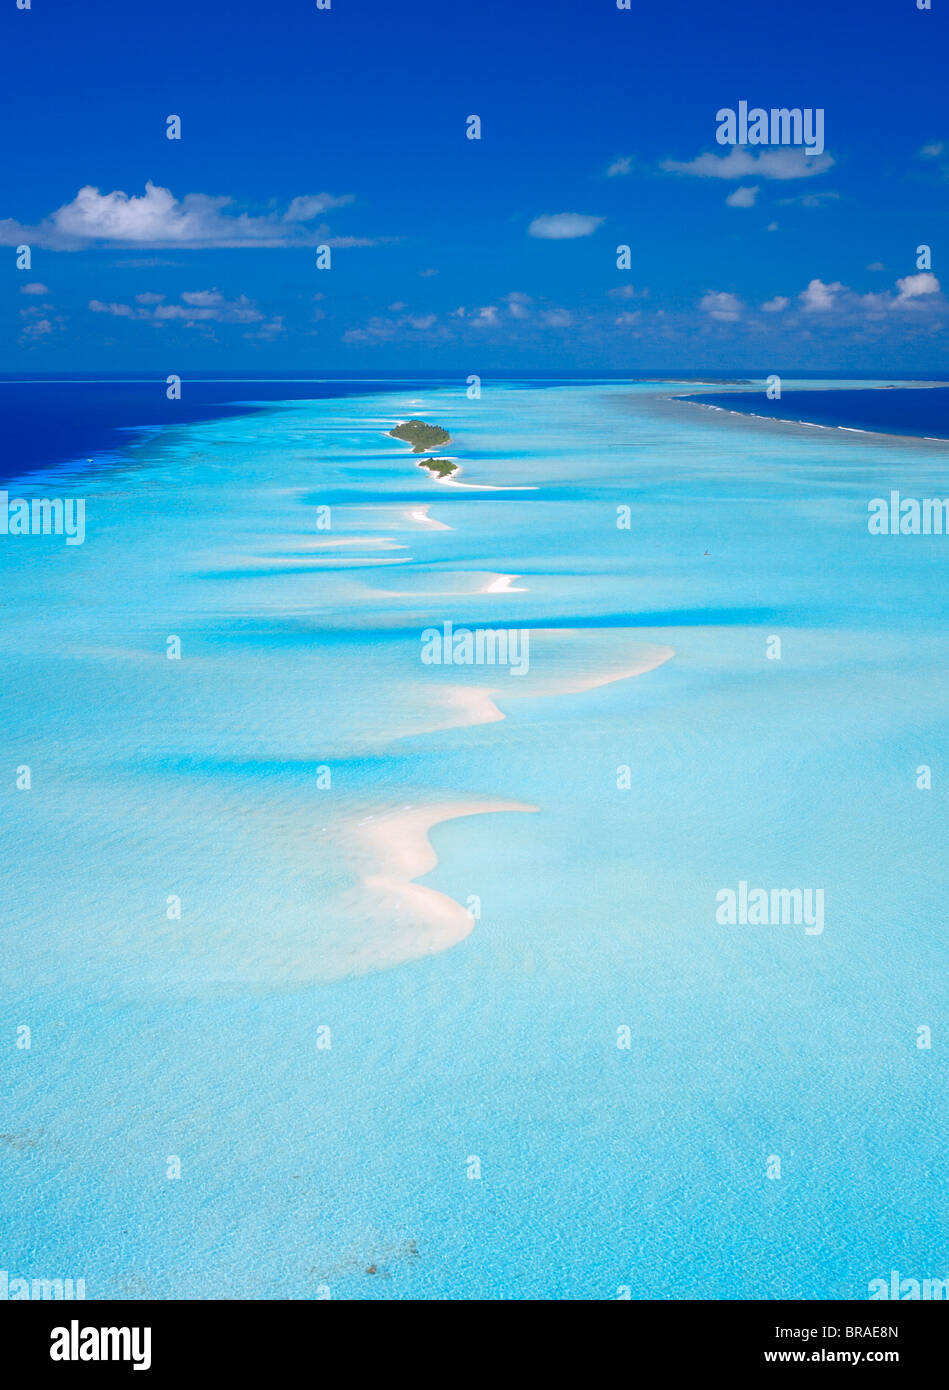 Aerial view of tropical island with lagoon, Maldives, Indian Ocean, Asia Stock Photo